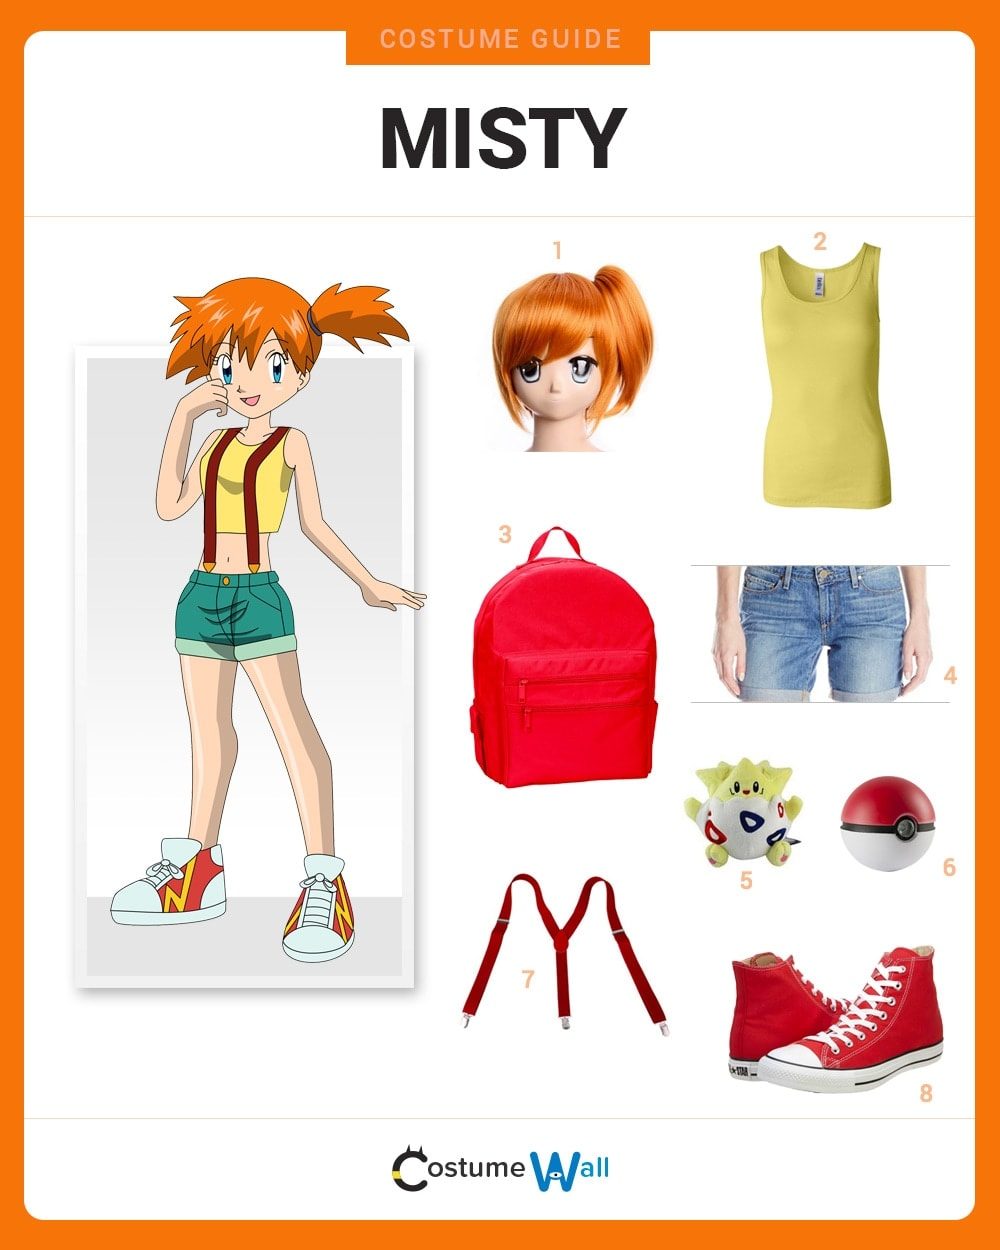 Misty Costume Guide